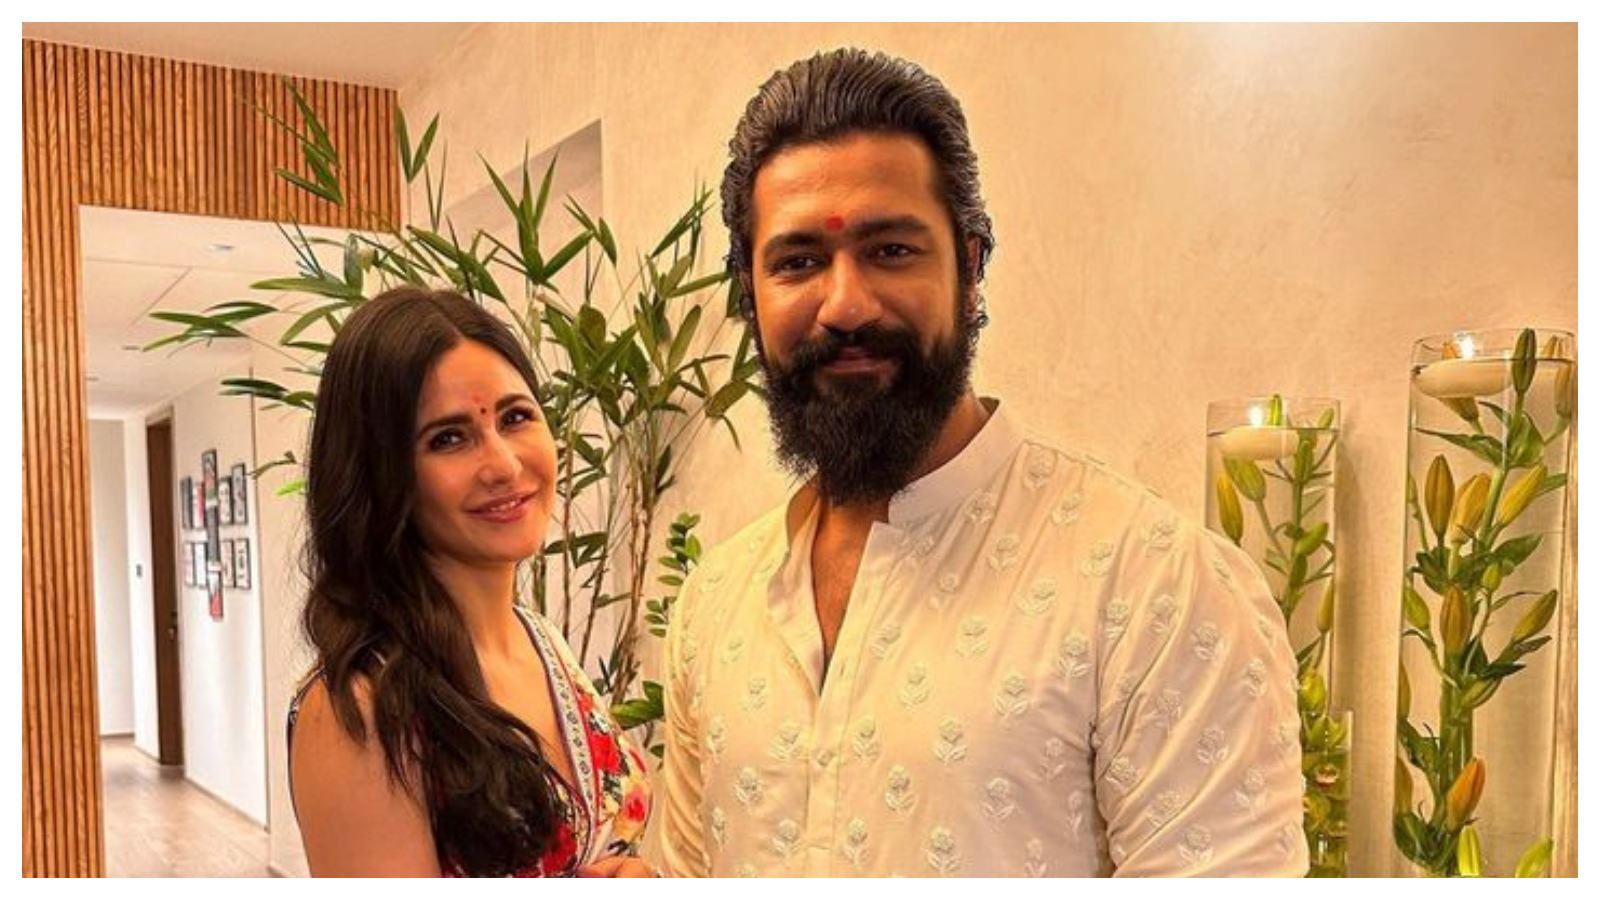 Ktrina Keaf Xn Xx Video - Vicky Kaushal shares video of 'beautiful' wife Katrina Kaif on second  marriage anniversary, calls her his 'in-life entertainment' | Bollywood  News - The Indian Express